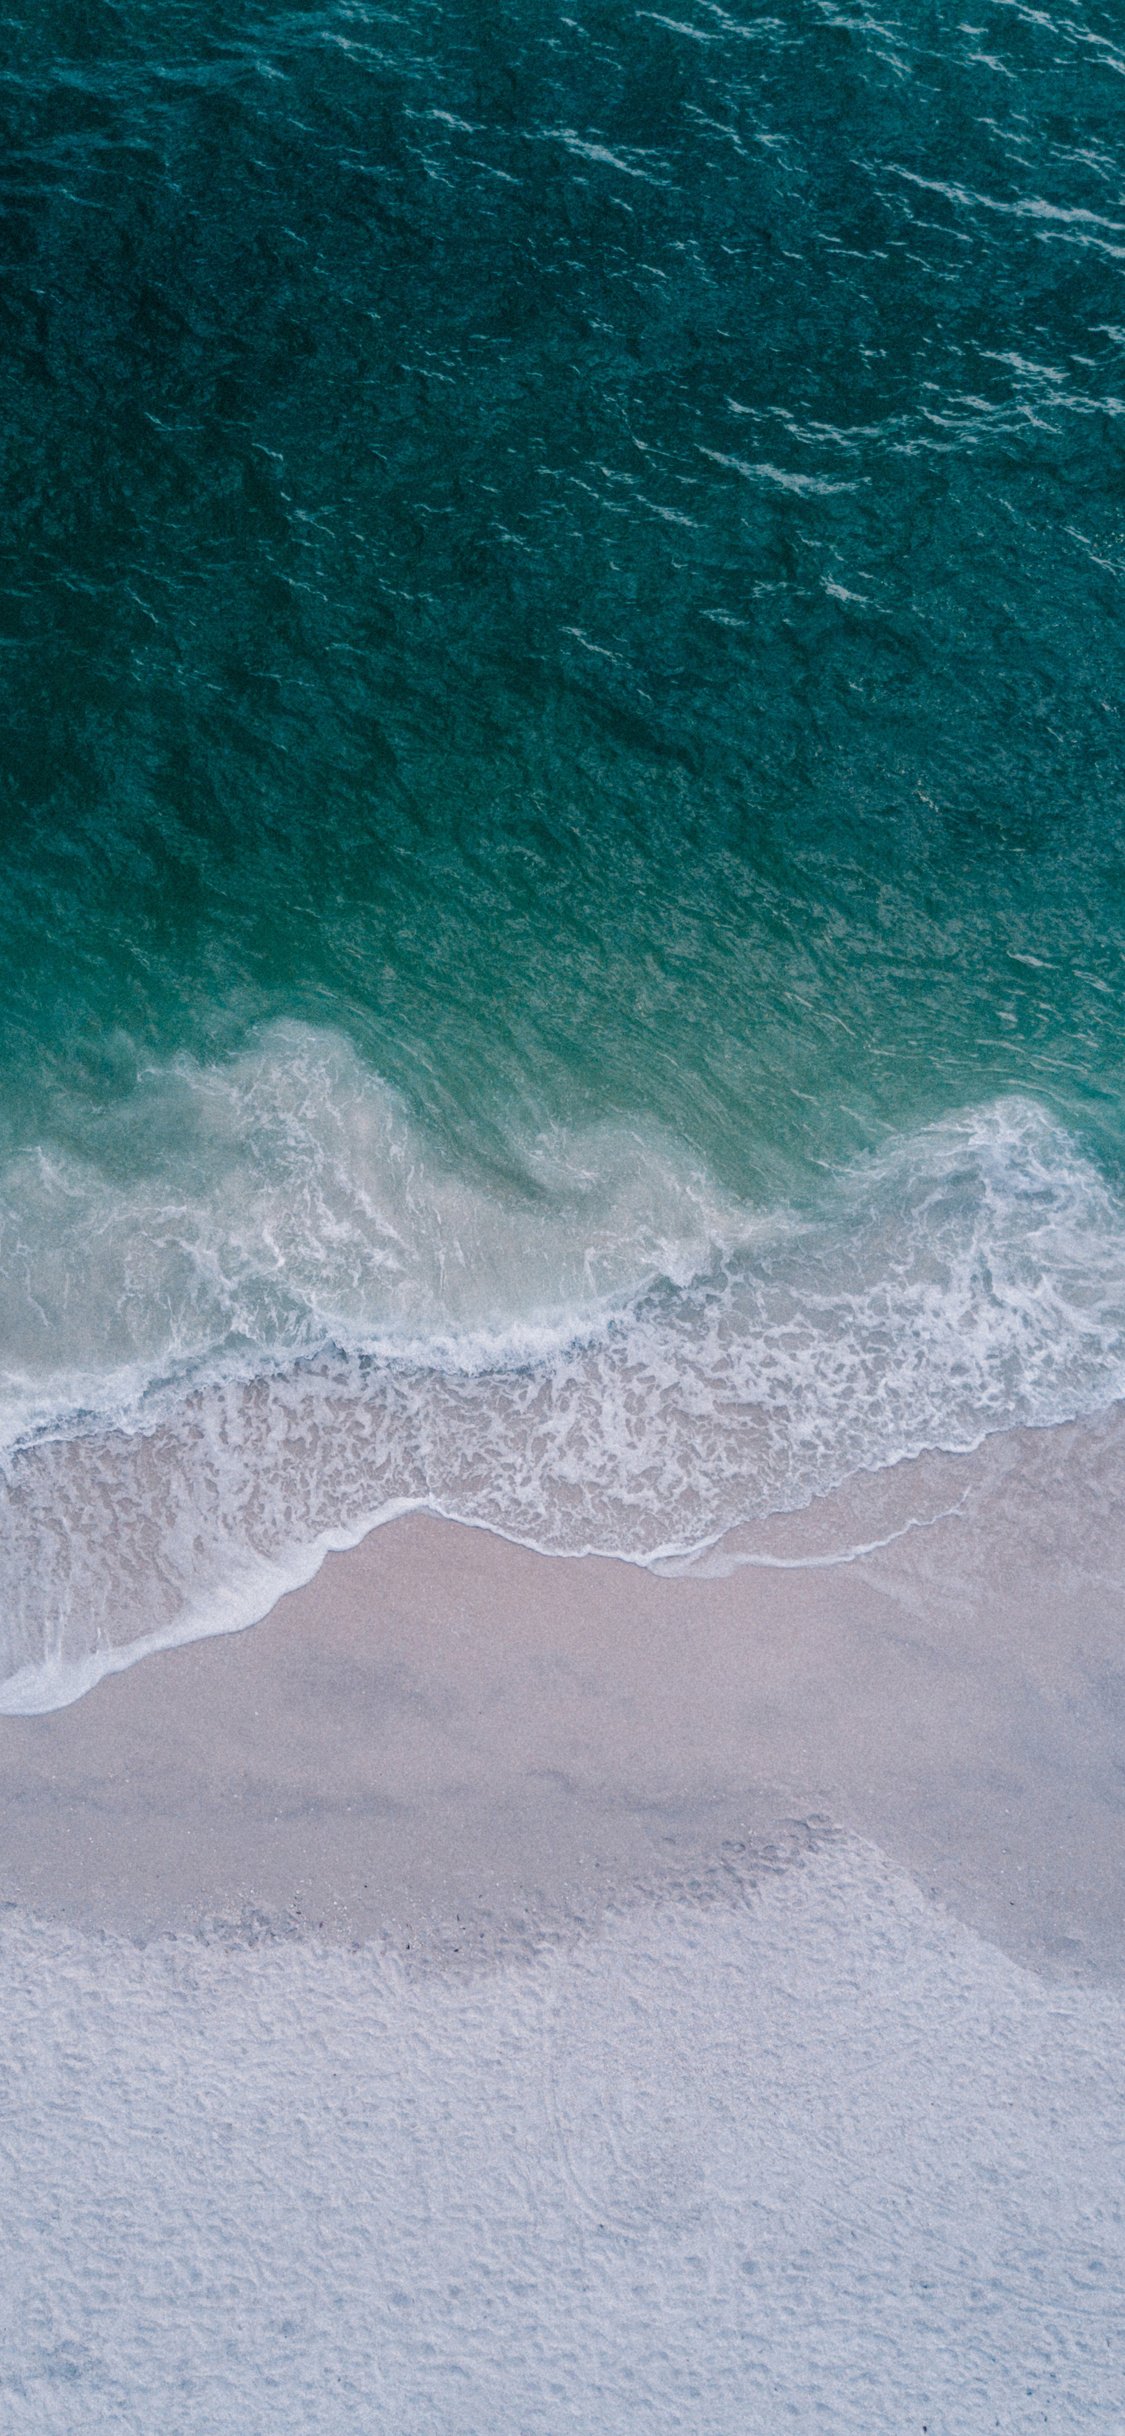 Seashore Top View Beach 4k iPhone XS, iPhone iPhone X HD 4k Wallpaper, Image, Background, Photo and Picture